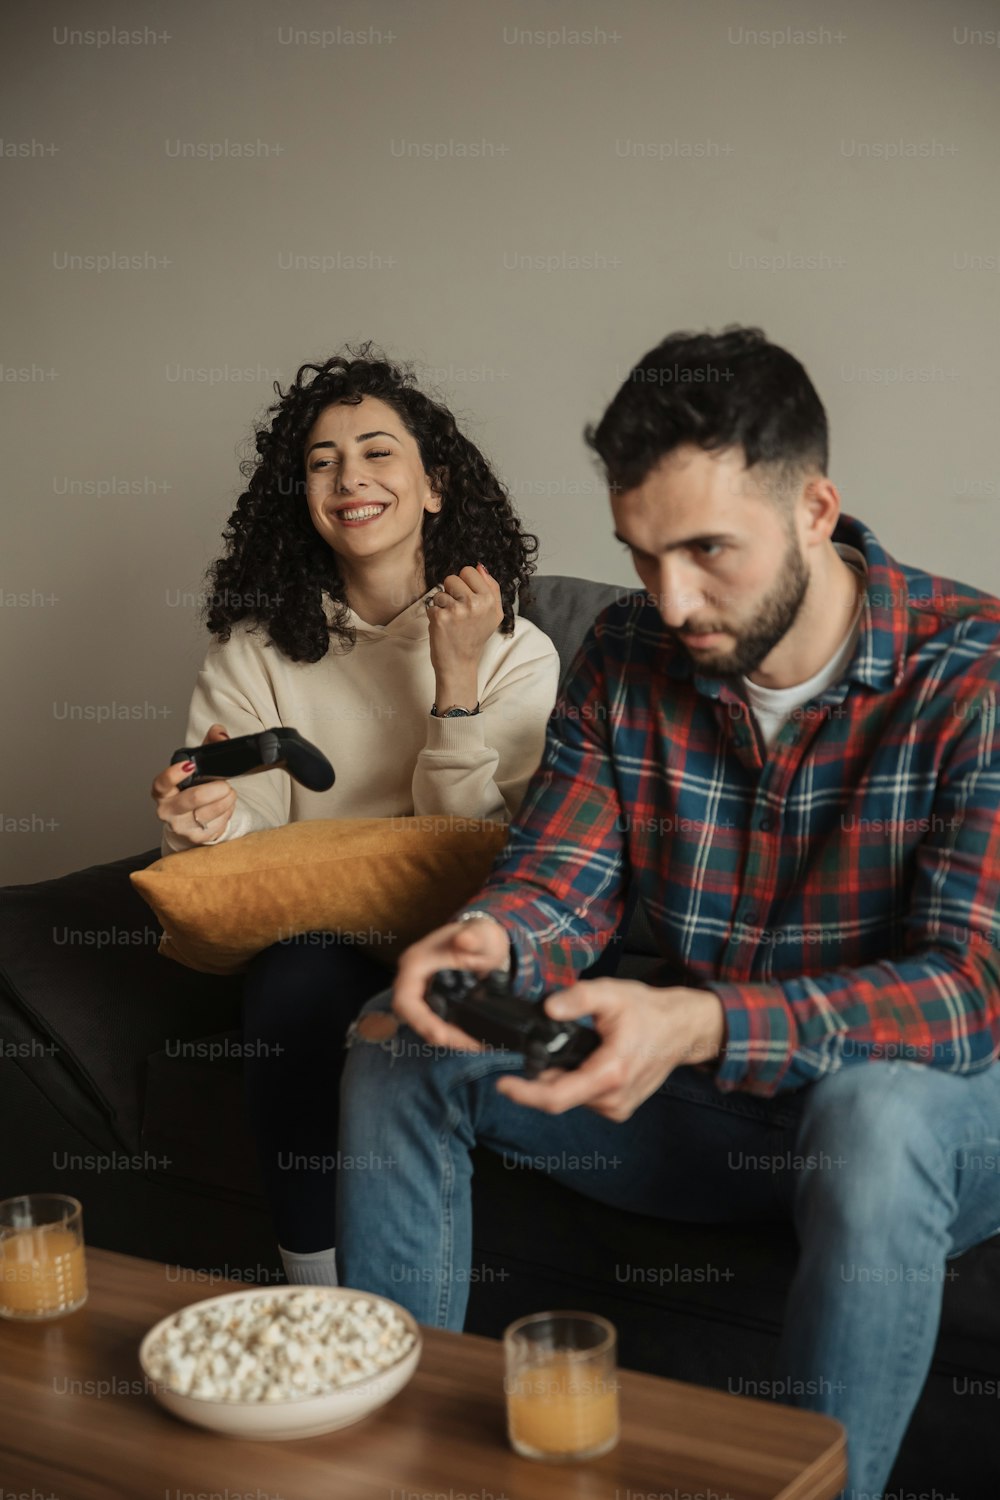 a man sitting on a couch next to a woman holding a remote control